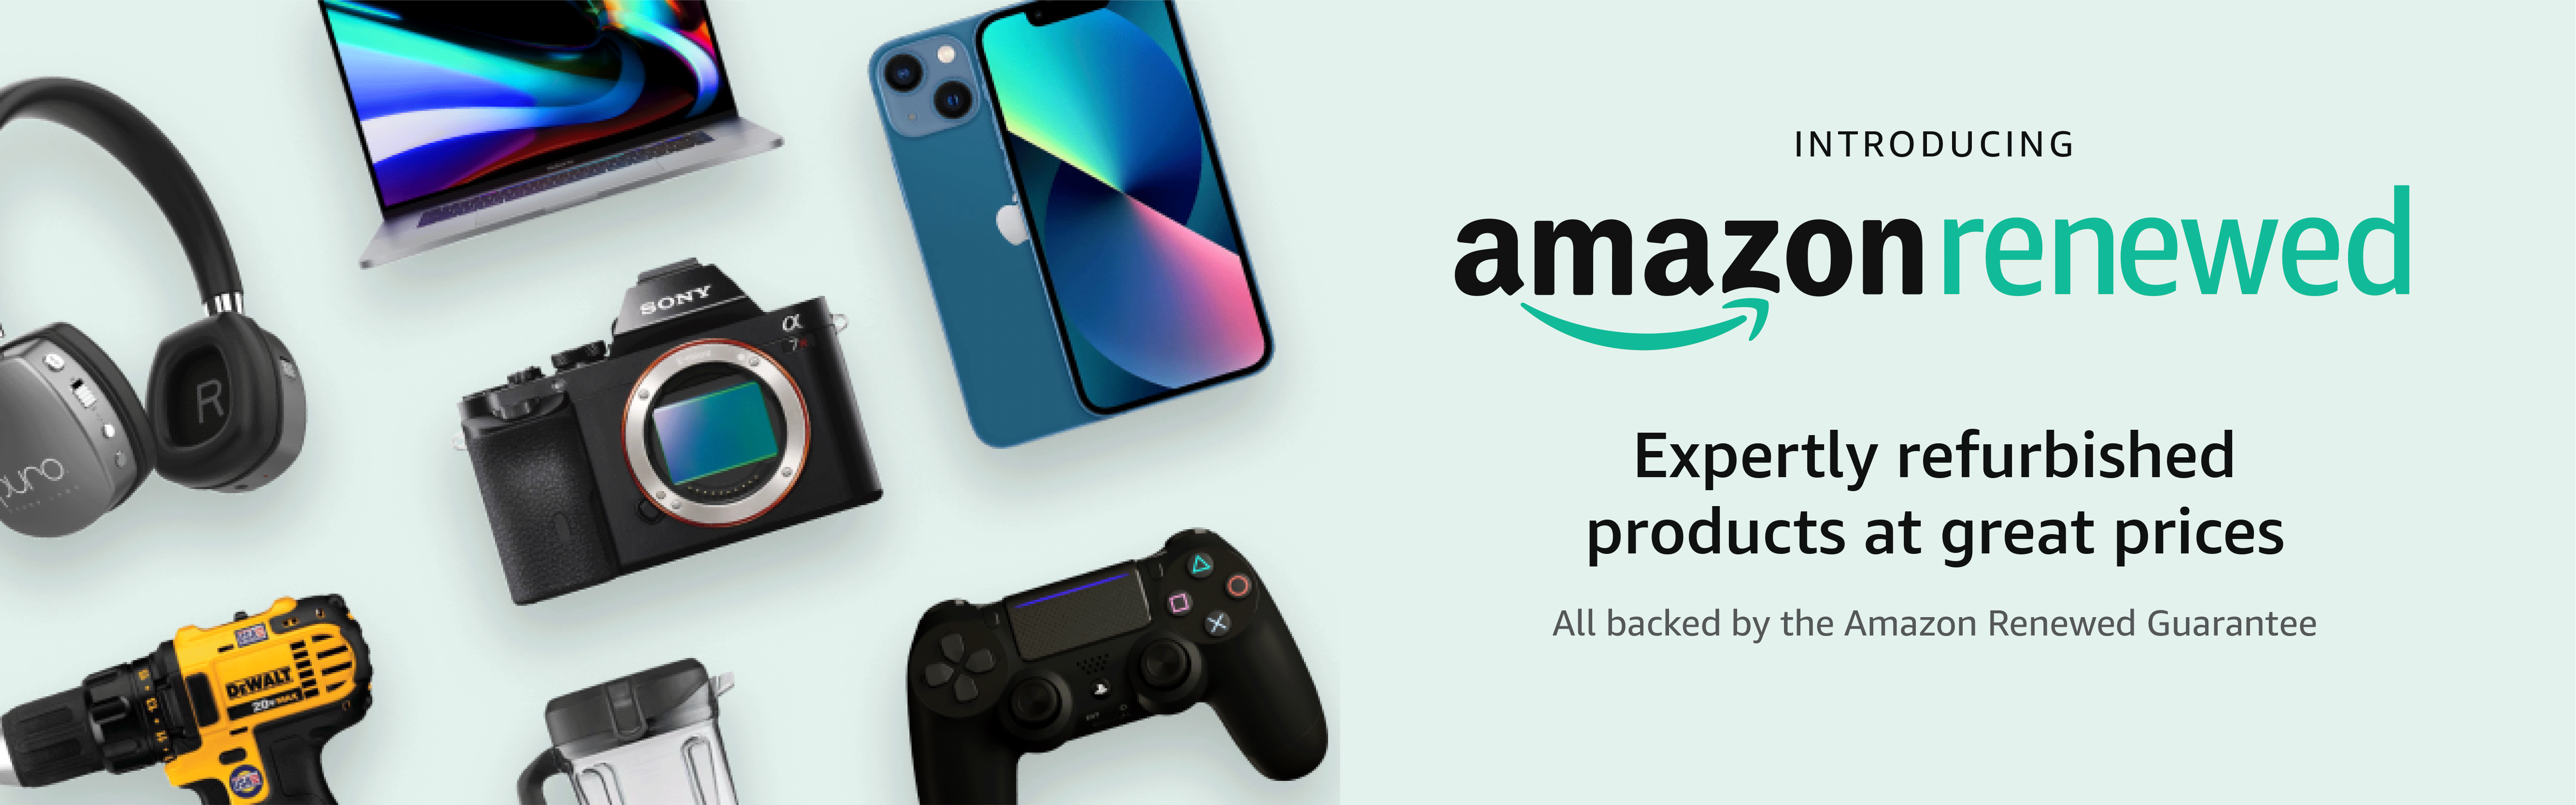 Introducing Amazon Renewed  Expertly refurbished products at great prices Backed by the Amazon Renewed Guarantee